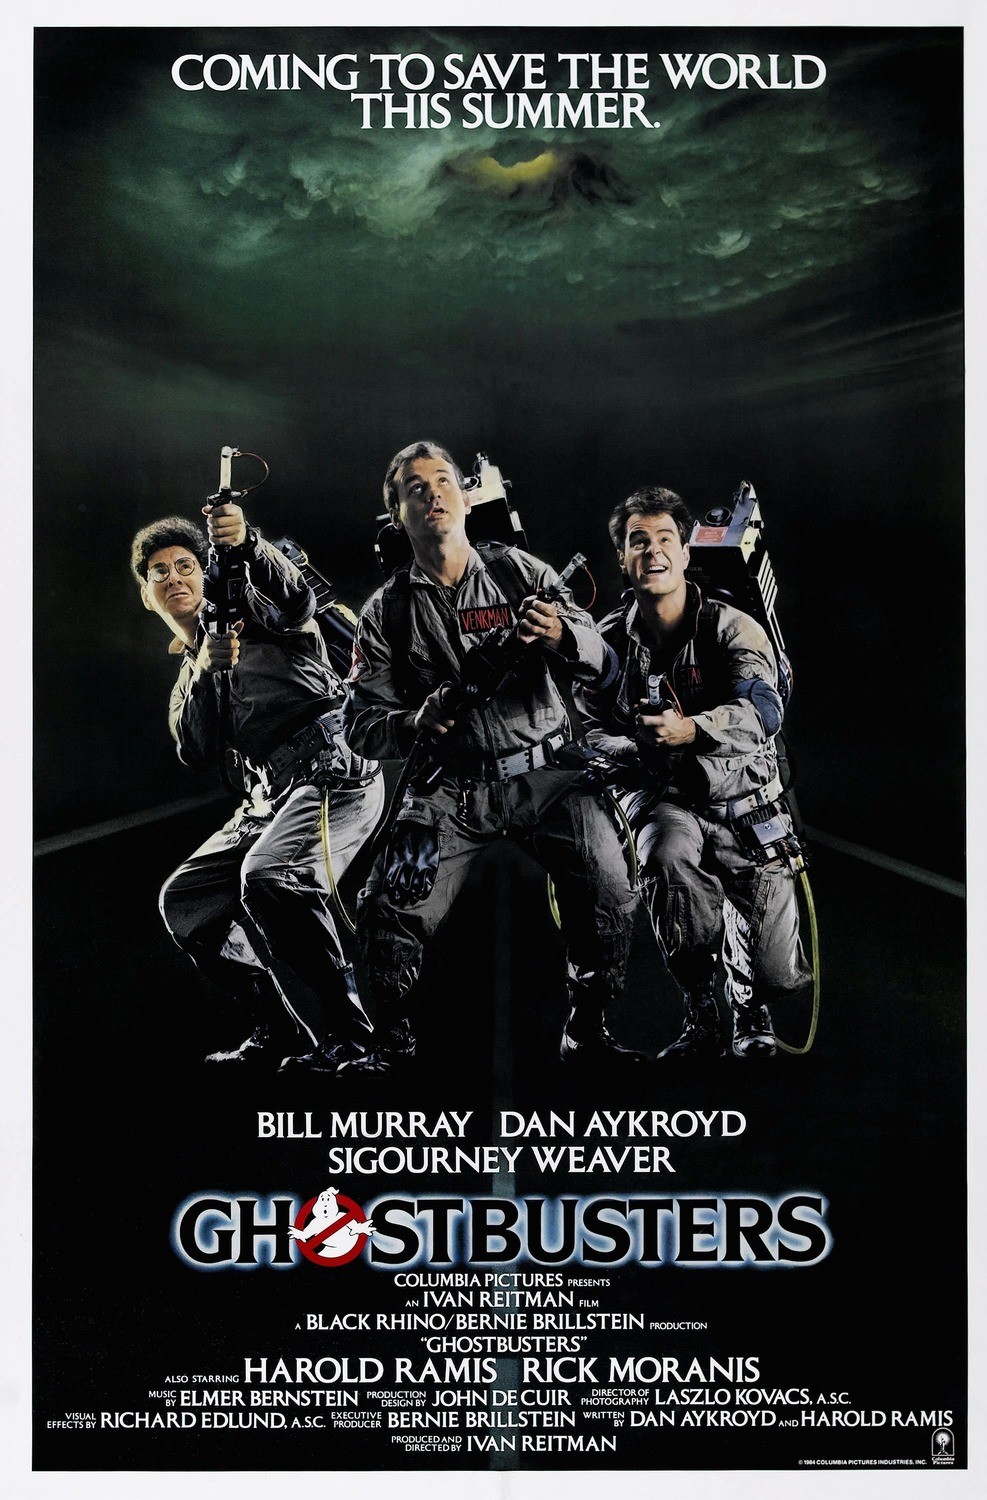 GHOSTBUSTERS - TRILOGY + SOLO SHOWS